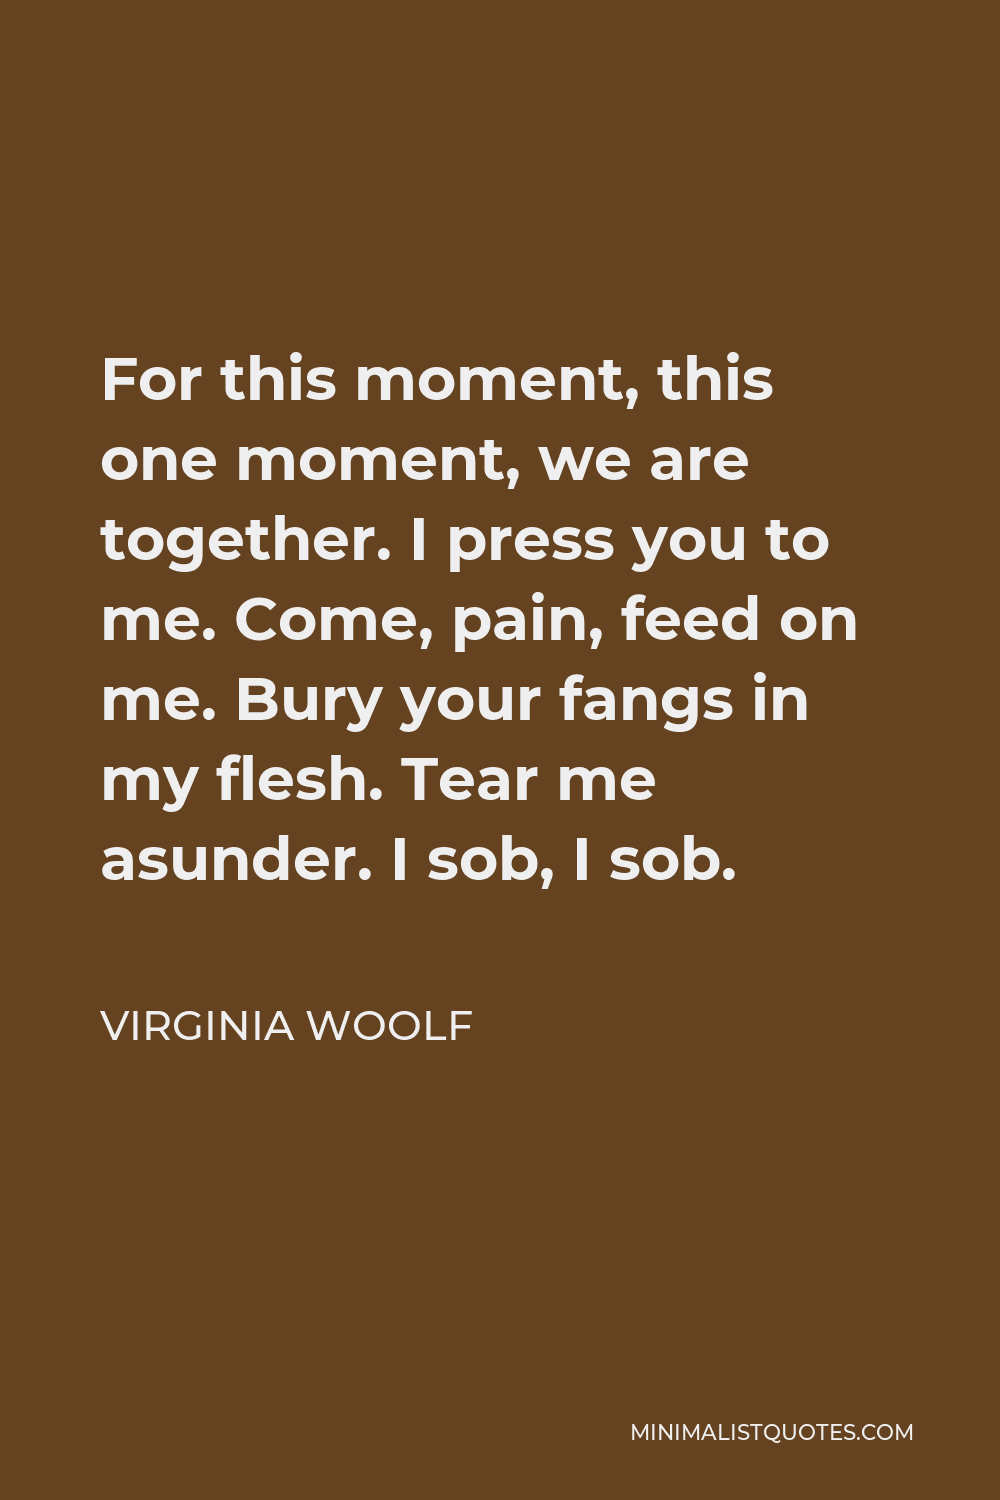 Virginia Woolf Quote - For this moment, this one moment, we are together. I press you to me. Come, pain, feed on me. Bury your fangs in my flesh. Tear me asunder. I sob, I sob.